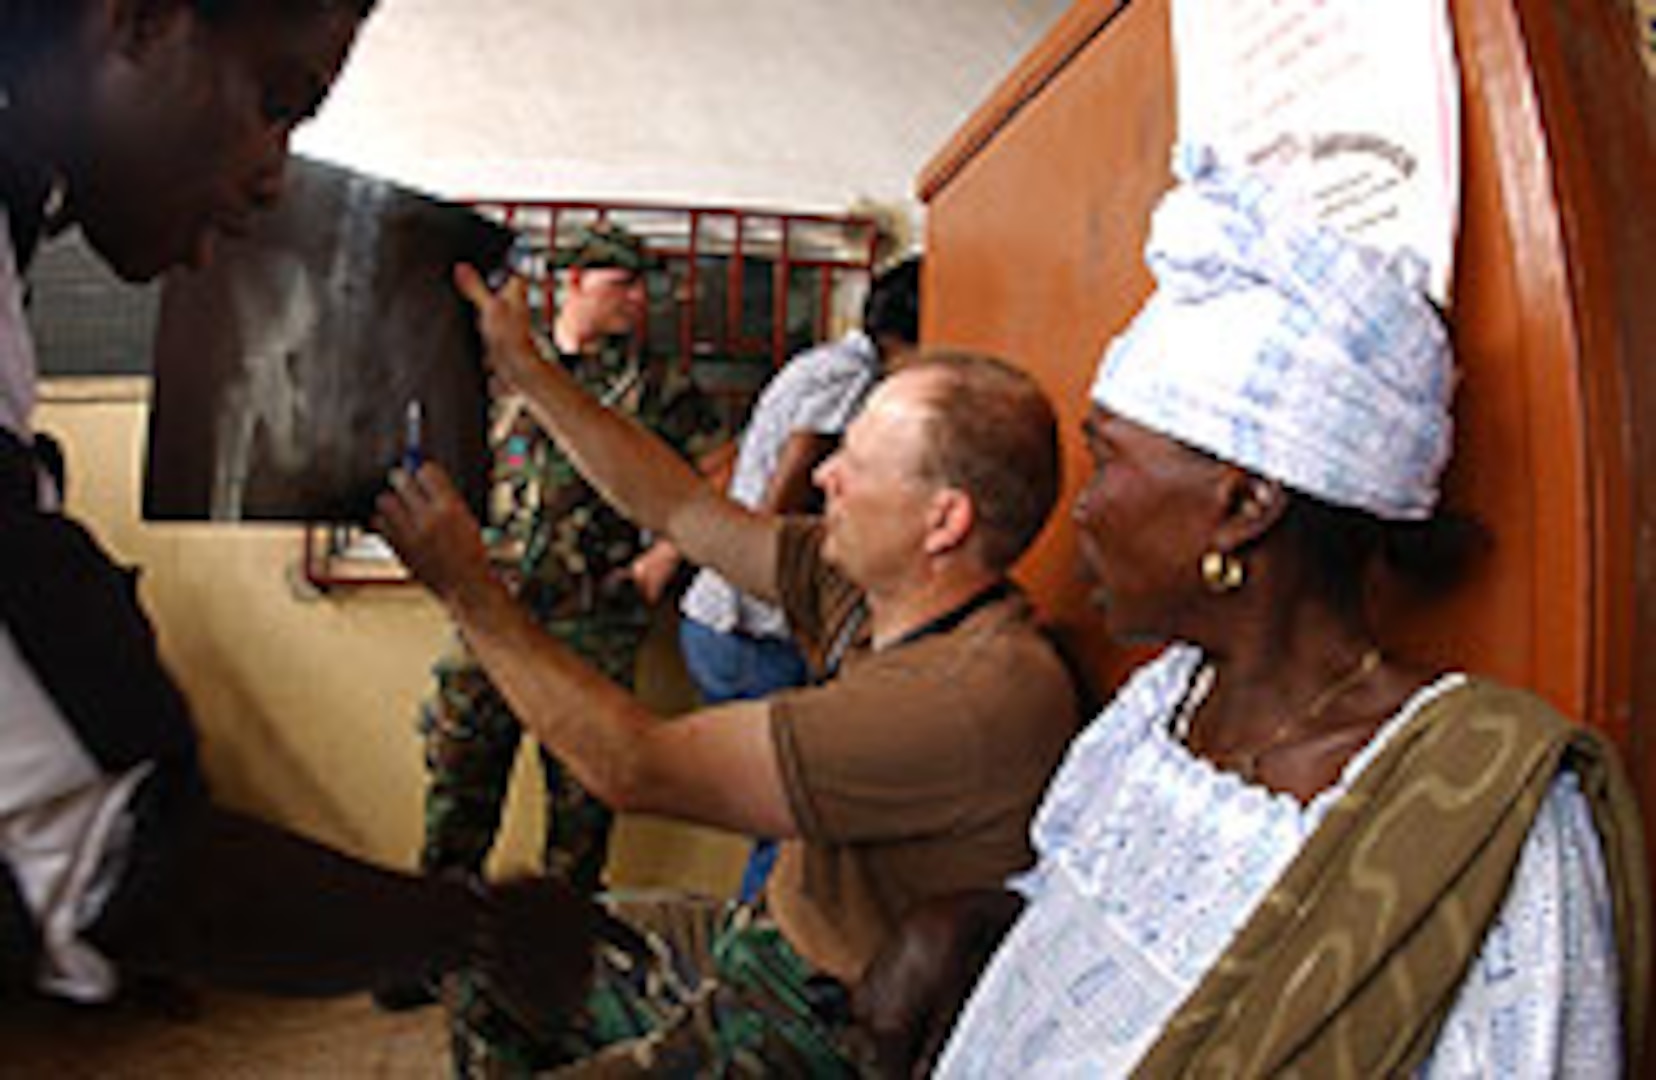 U.S Air Force flight surgeon Lt. Col. Bryan DeLage (119th Medical Group) shows patient Amena Salifu the x-ray of her hip fracture at the Mallam-Atta Market Government Clinic as part of the Medflag 2006 joint force humanitarian medical assistance exercise Accra, Ghana Sep. 13. Amena Salifu walked to the clinic on the broken hip to be examined. The North Dakota National Guard medical group members and support personnel are in Ghana as part of Medflag 2006, which is a U.S. military medical exercise that is geared toward gaining and providing training and experience in management of world health problems, sharing of medical information and techniques with African host countries, and providing humanitarian civic assistance to host nation civilian populations as good will ambassadors of the United States.